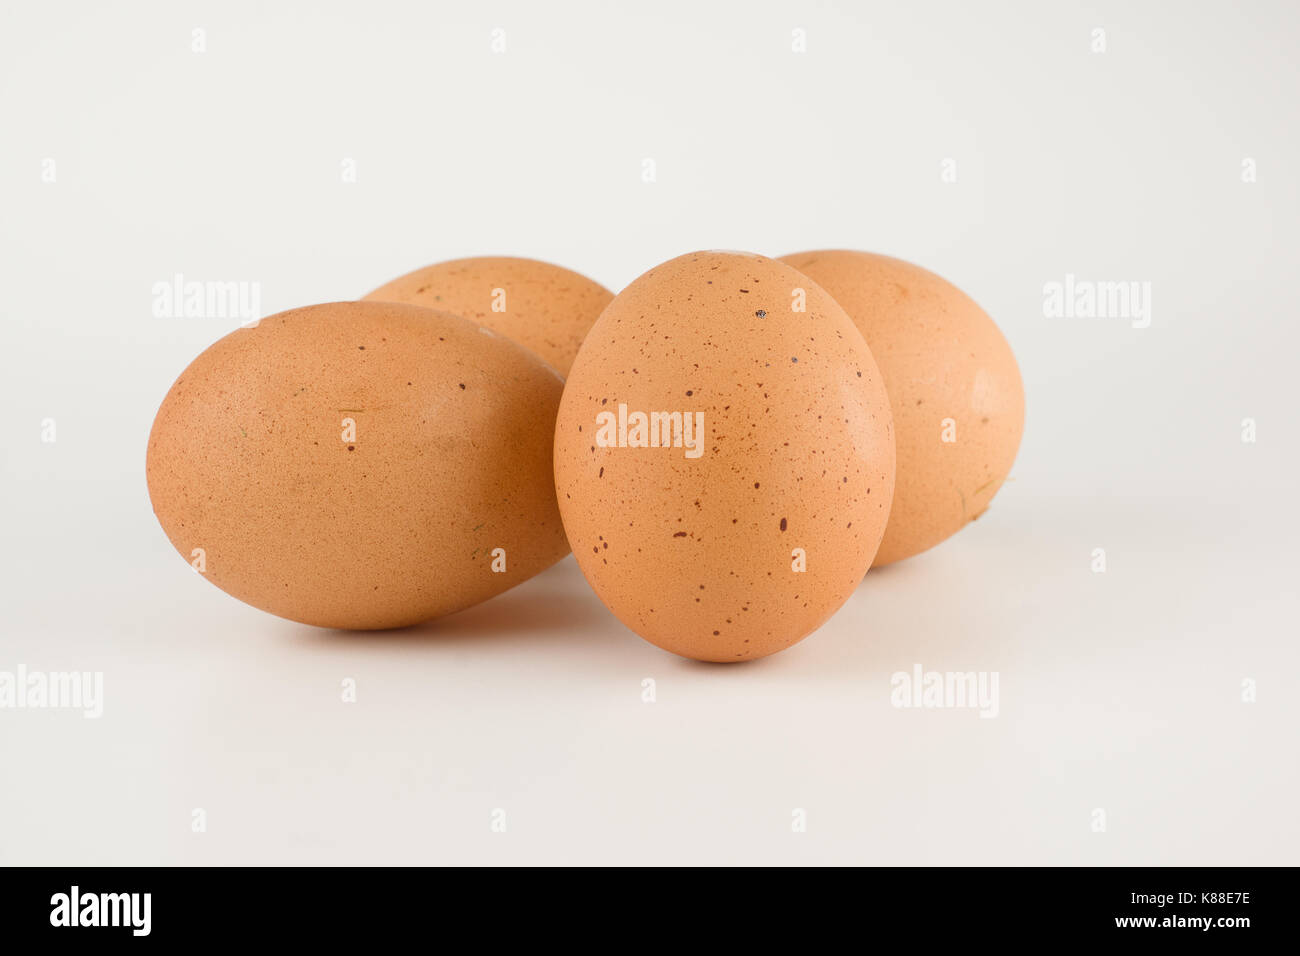 Four fresh rustic eggs isolated on white background Stock Photo